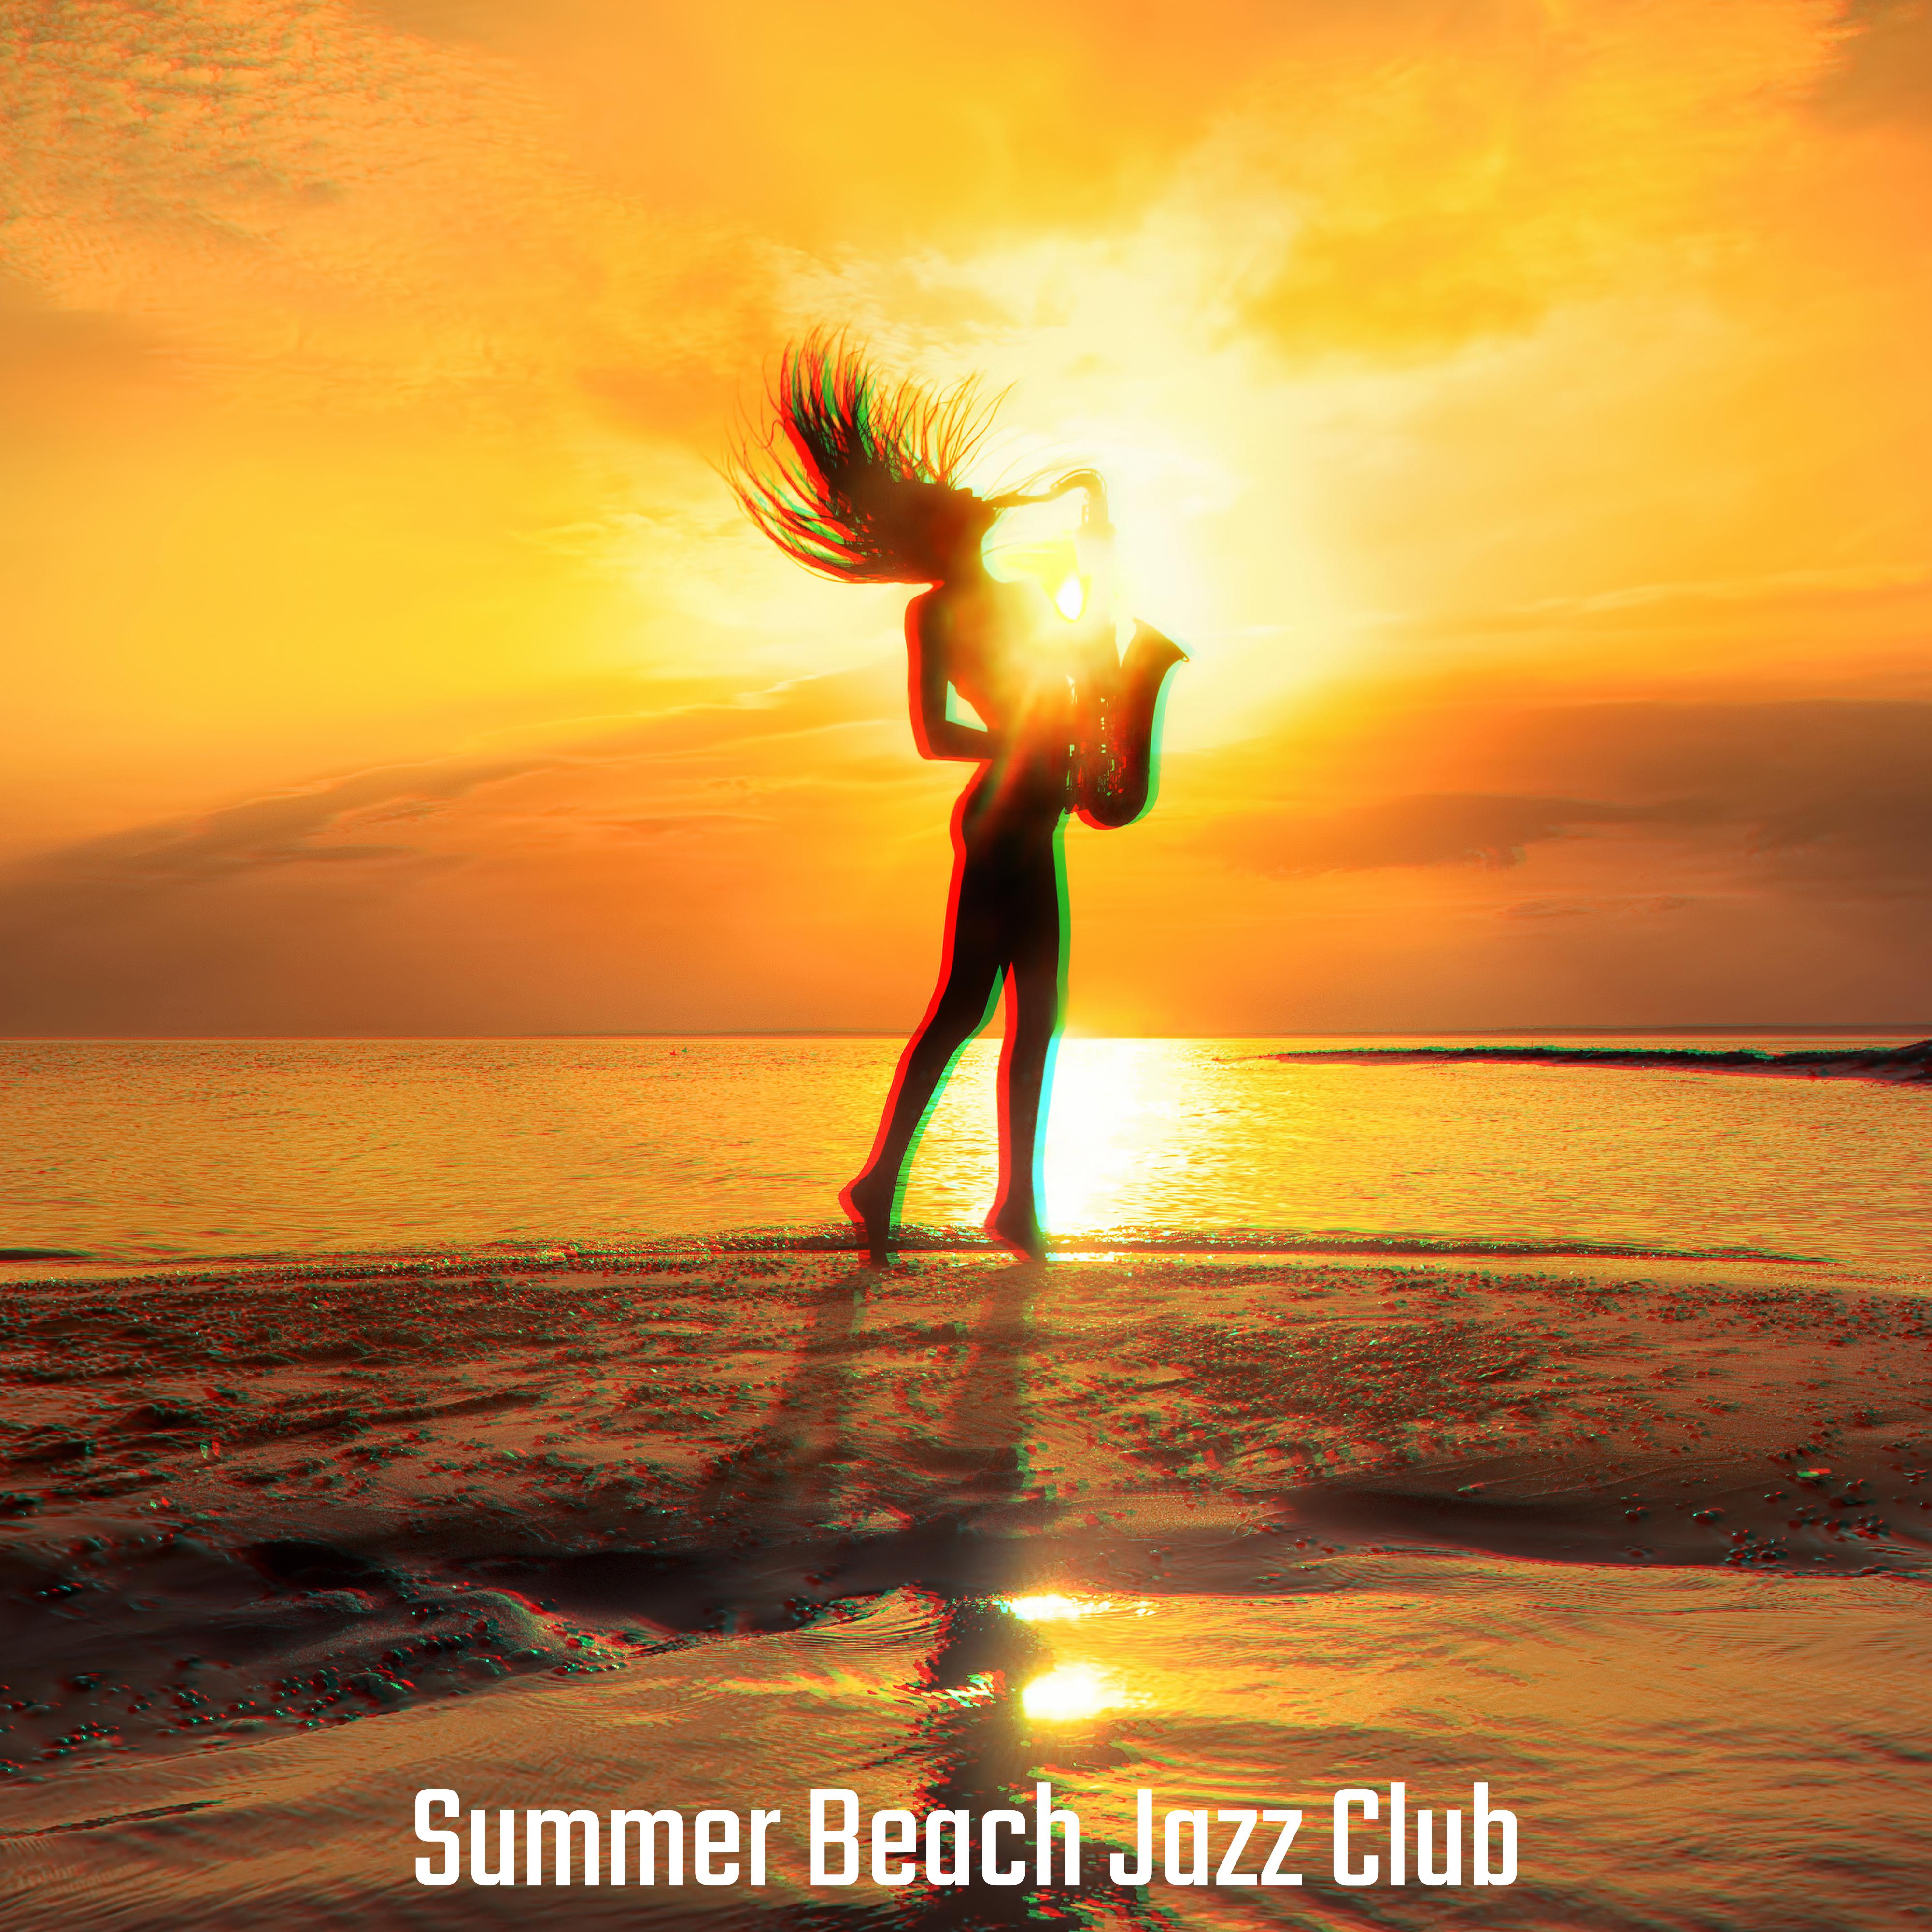 Summer Beach Jazz Club: 2019 Instrumental Smooth Jazz in a Good Style, Vintage Melodies, Holiday Full Positive Relaxation